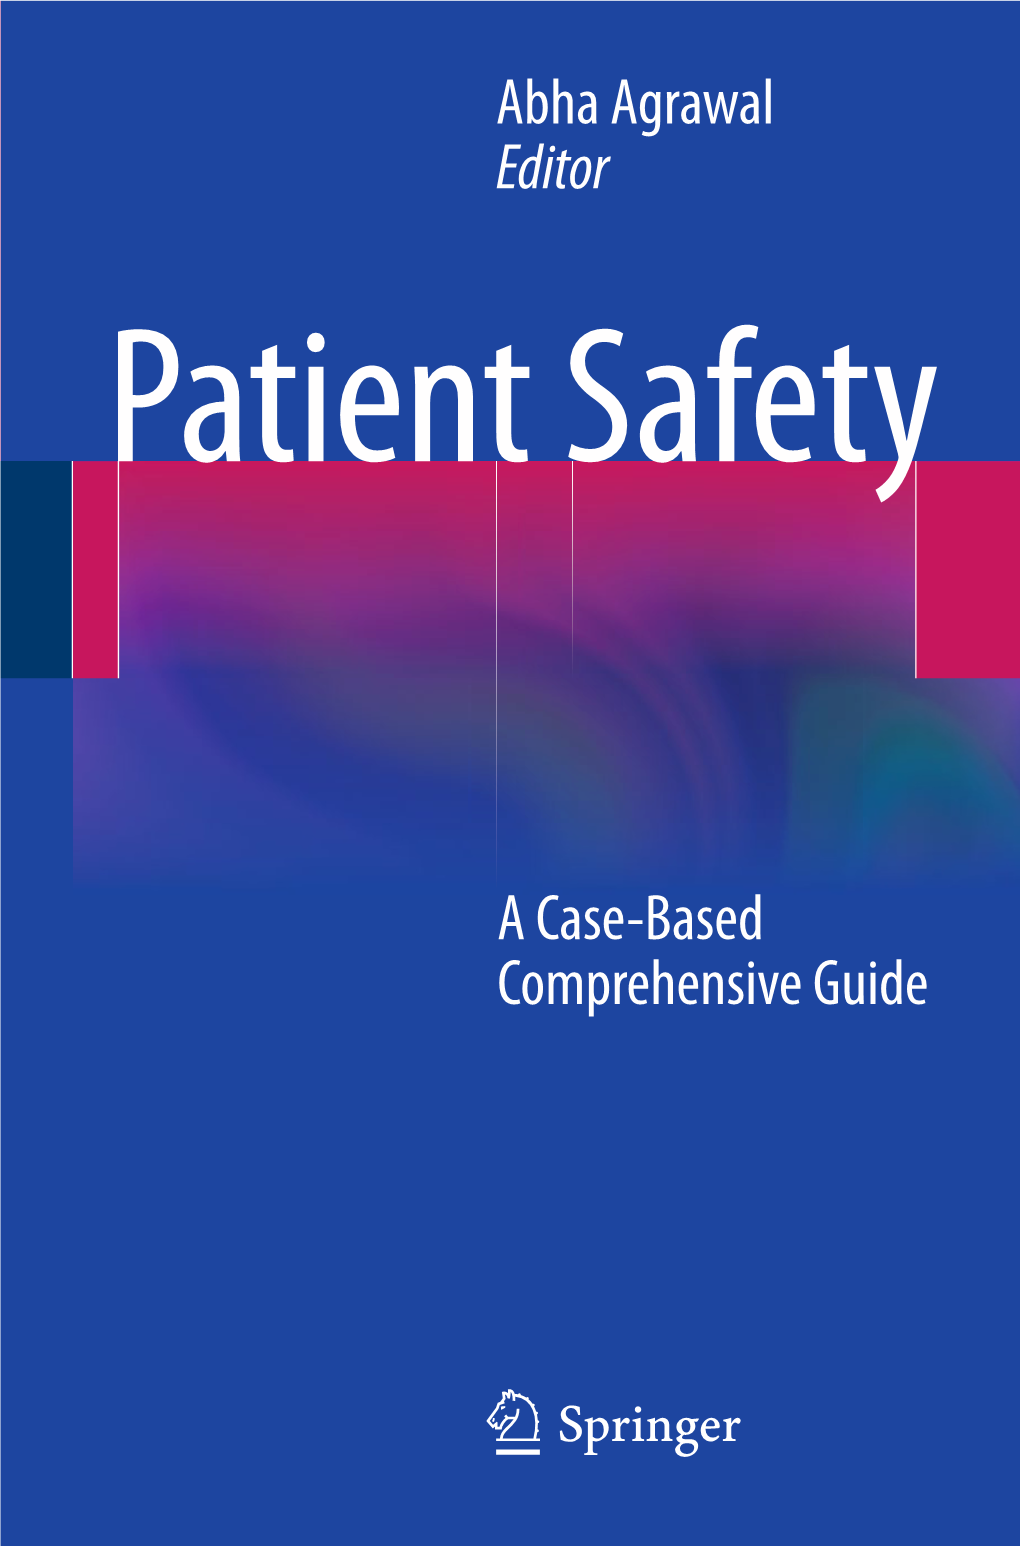 A Case-Based Comprehensive Guide Abha Agrawal Editor